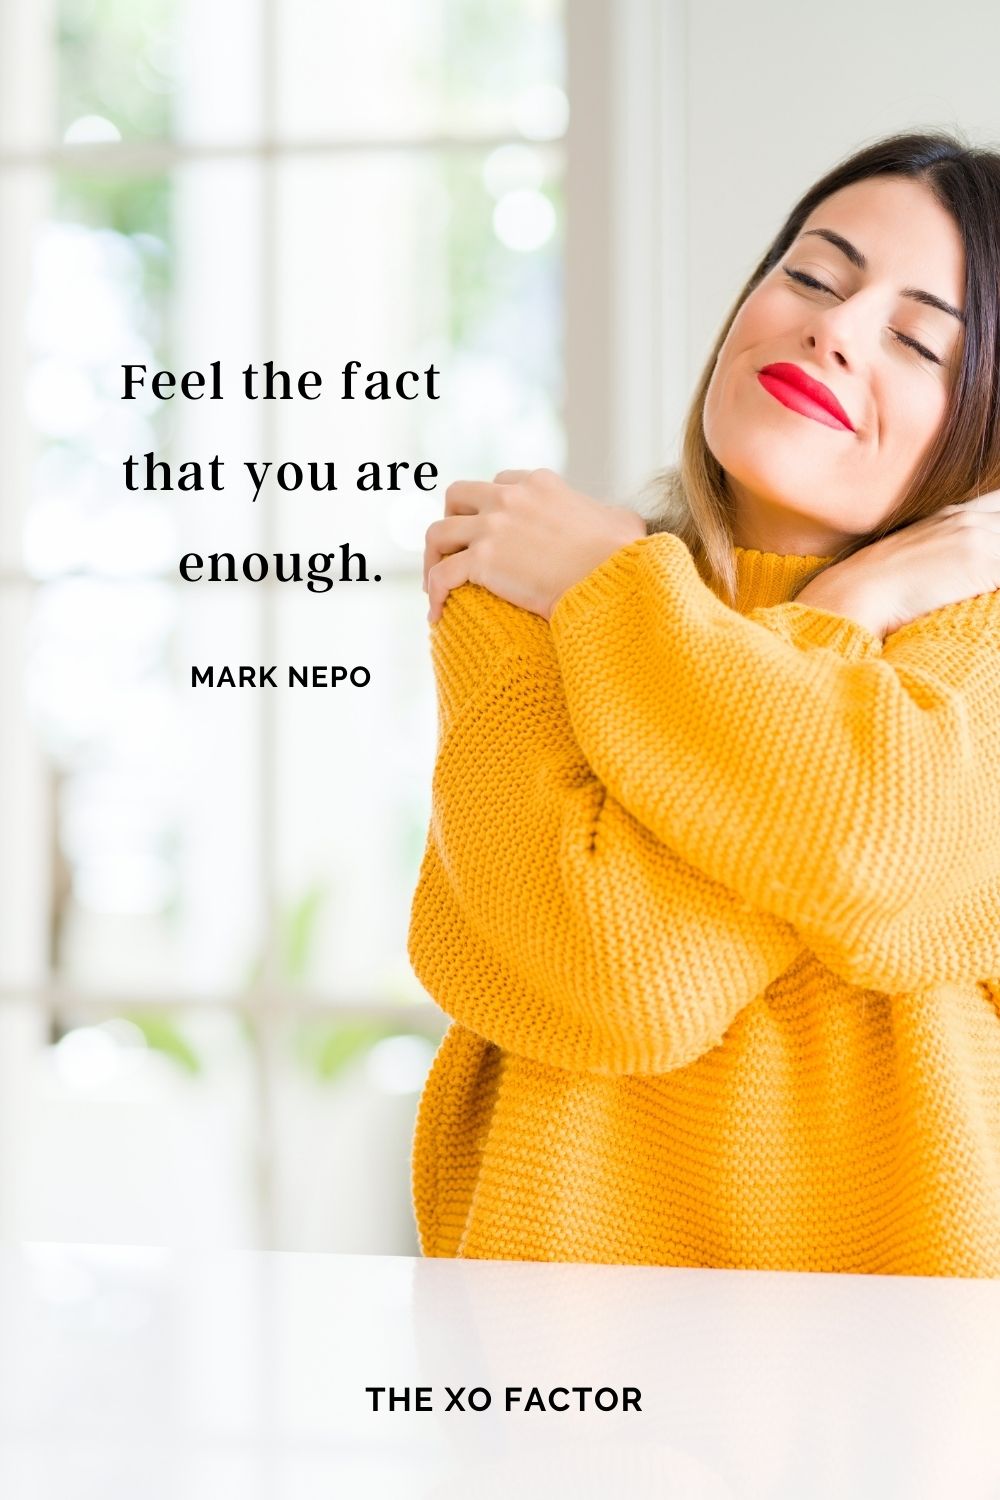 Feel the fact that you are enough. Mark Nepo